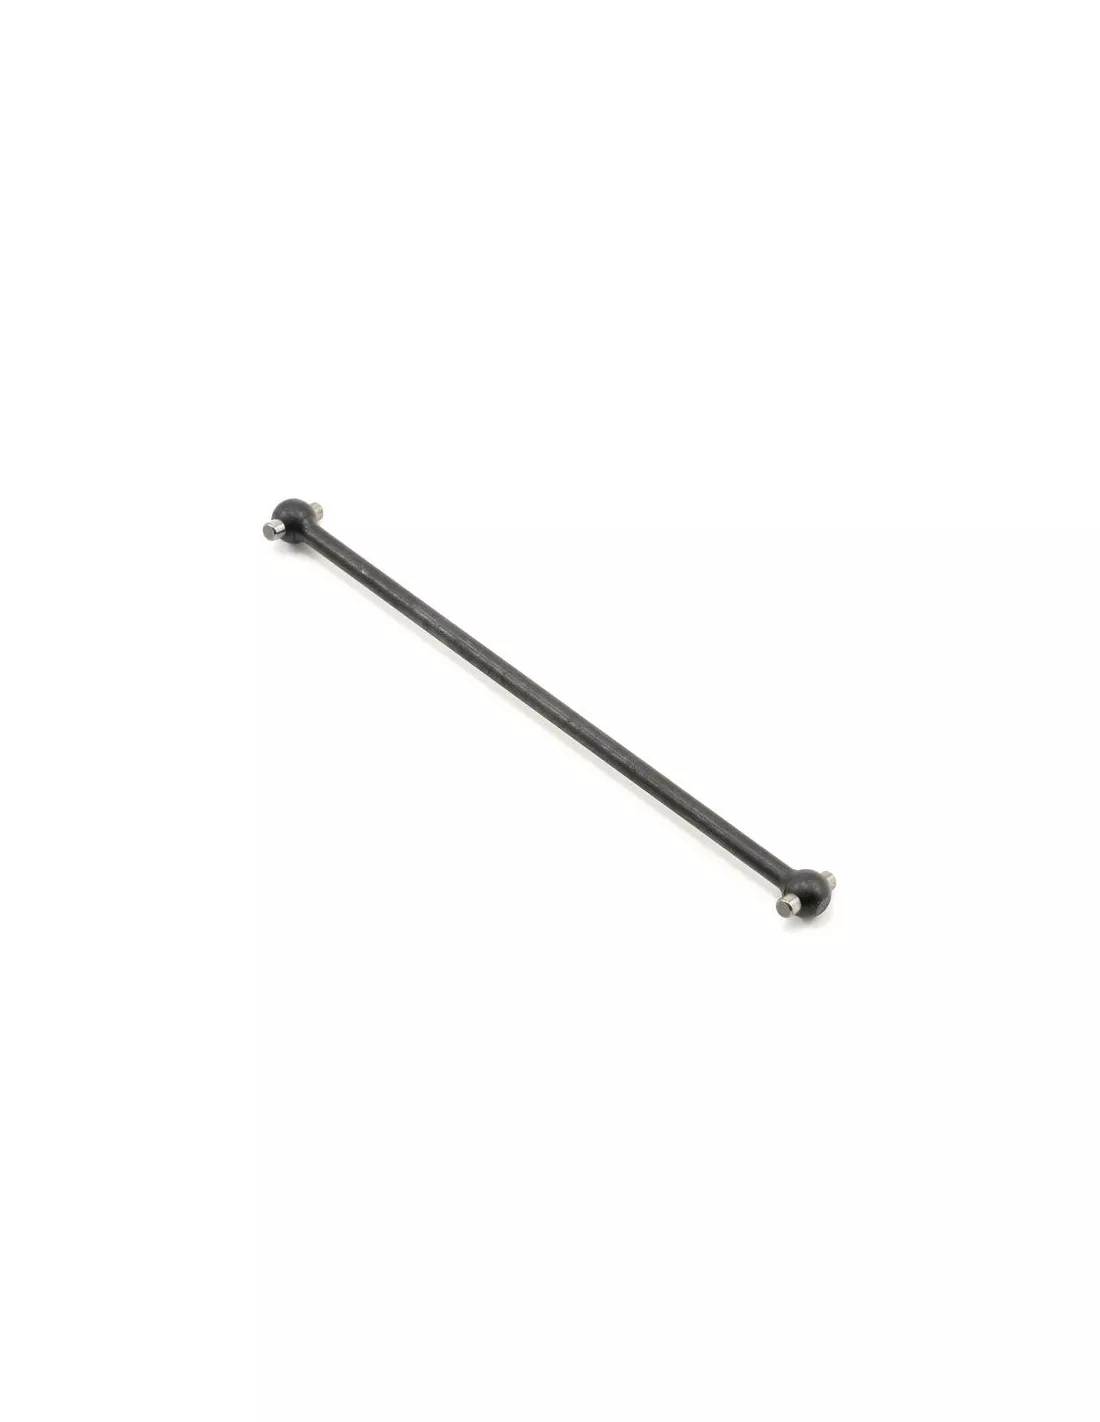 Kyosho TR154 Center/Front Swing Shaft DBX DRX 